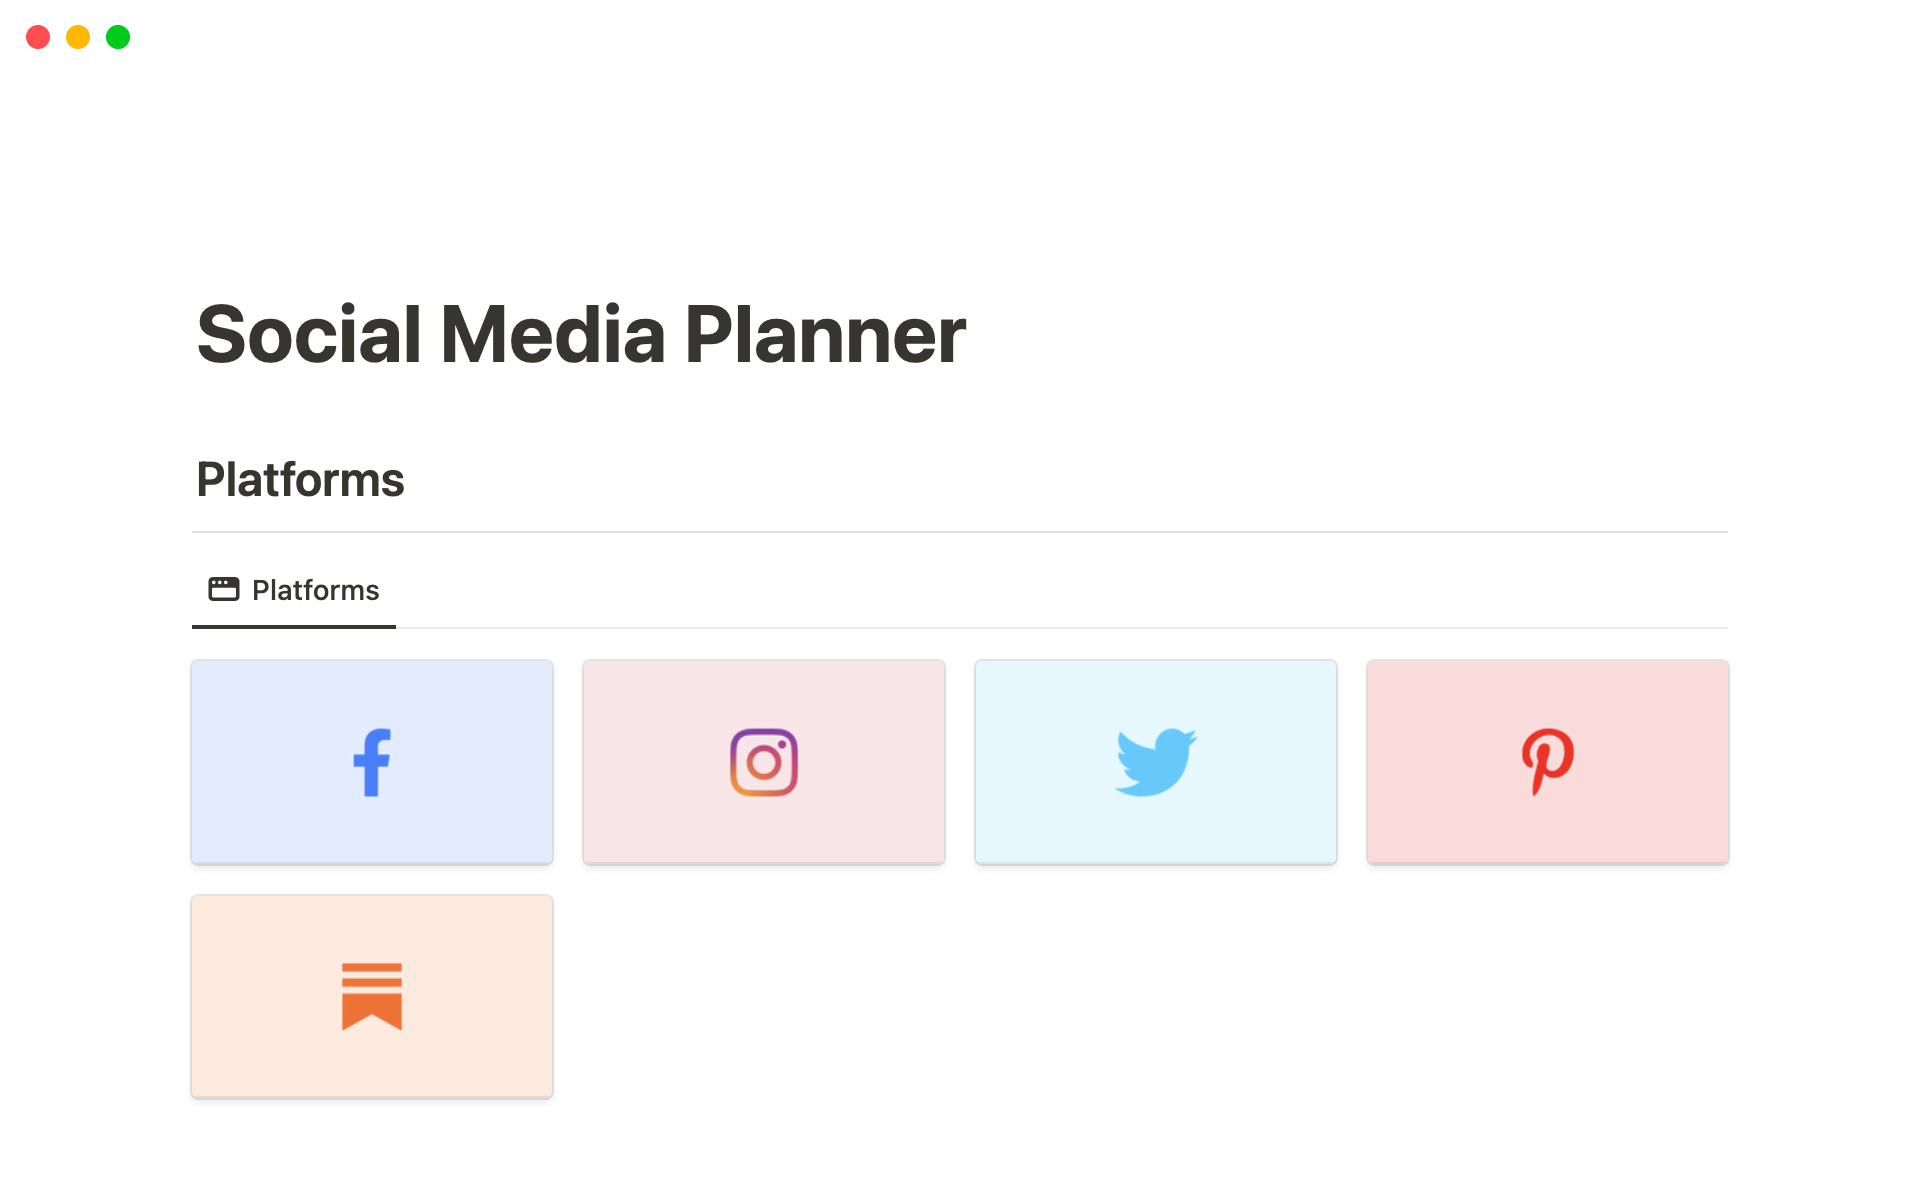 Organize all your social media content in a single workspace - efficiently manage posts, create content schedules, and much more